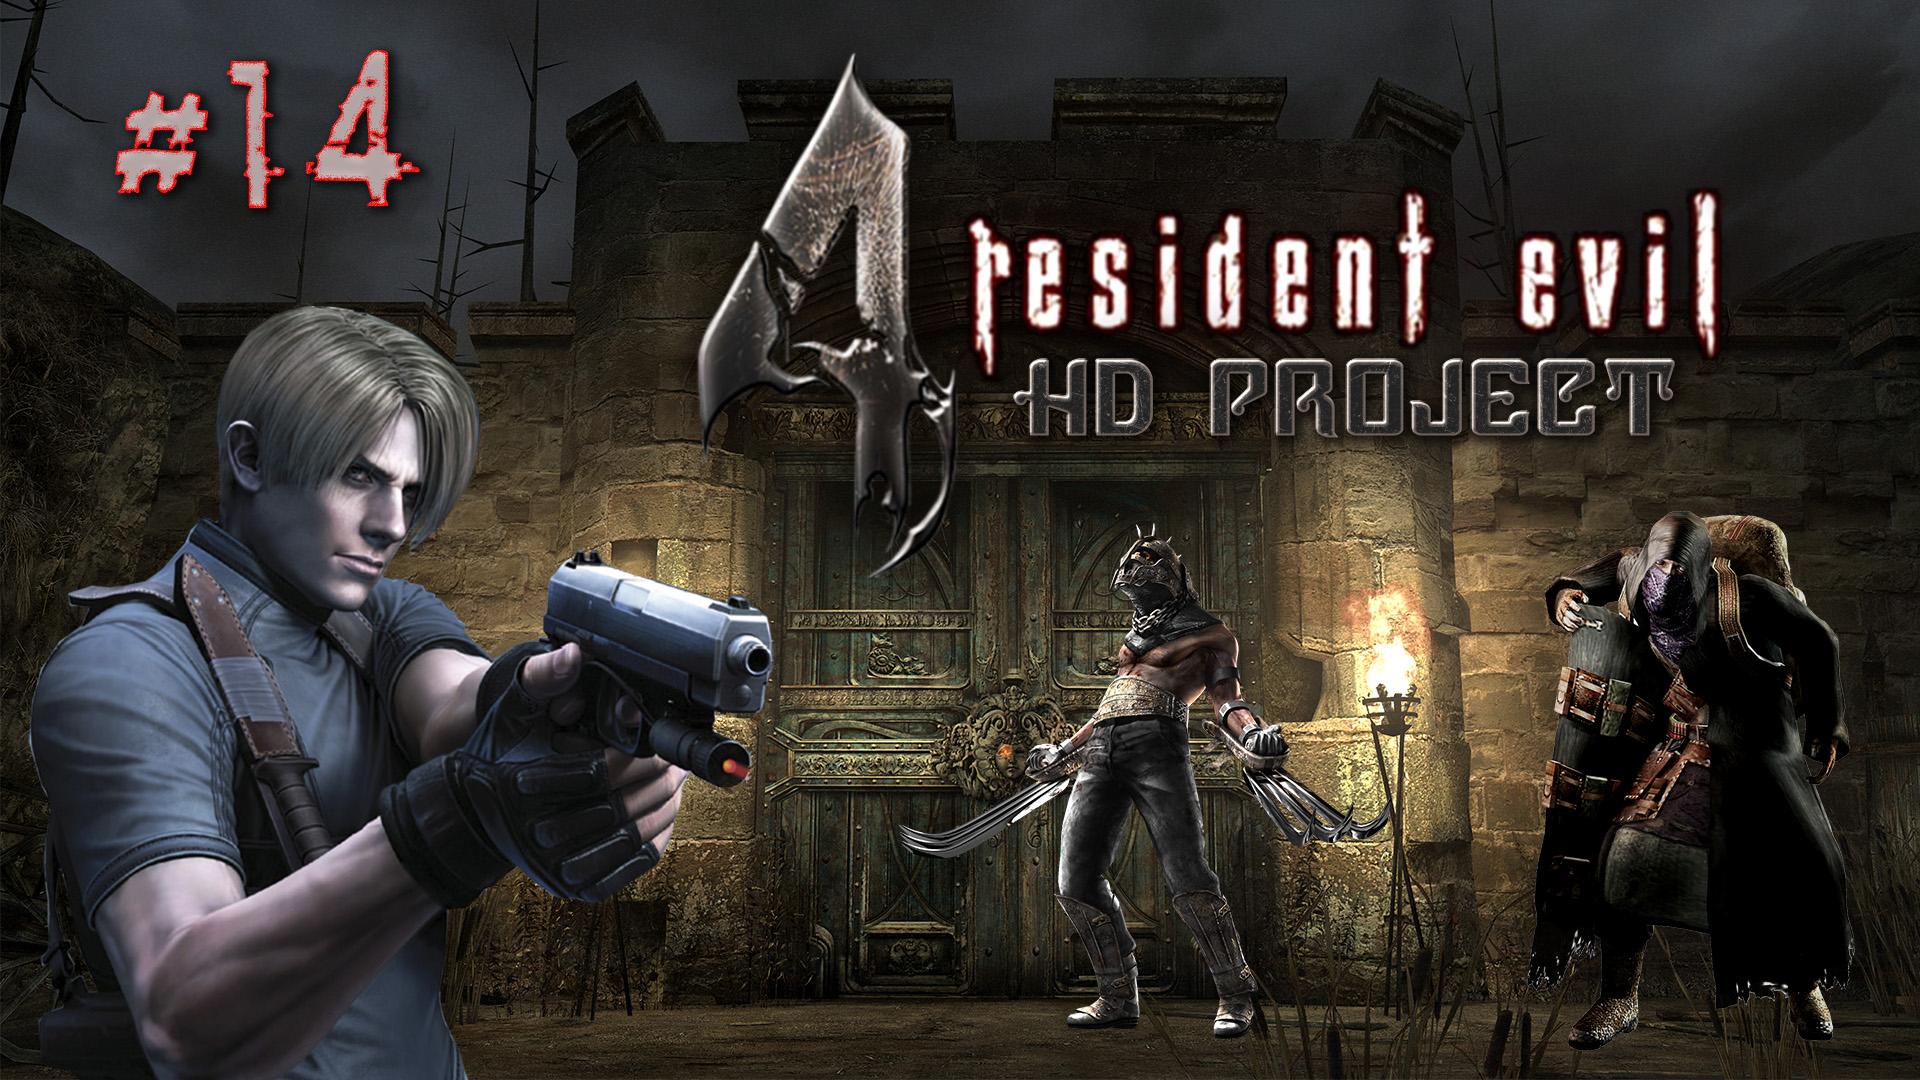 Steam resident evil 4 ultimate hd фото 81